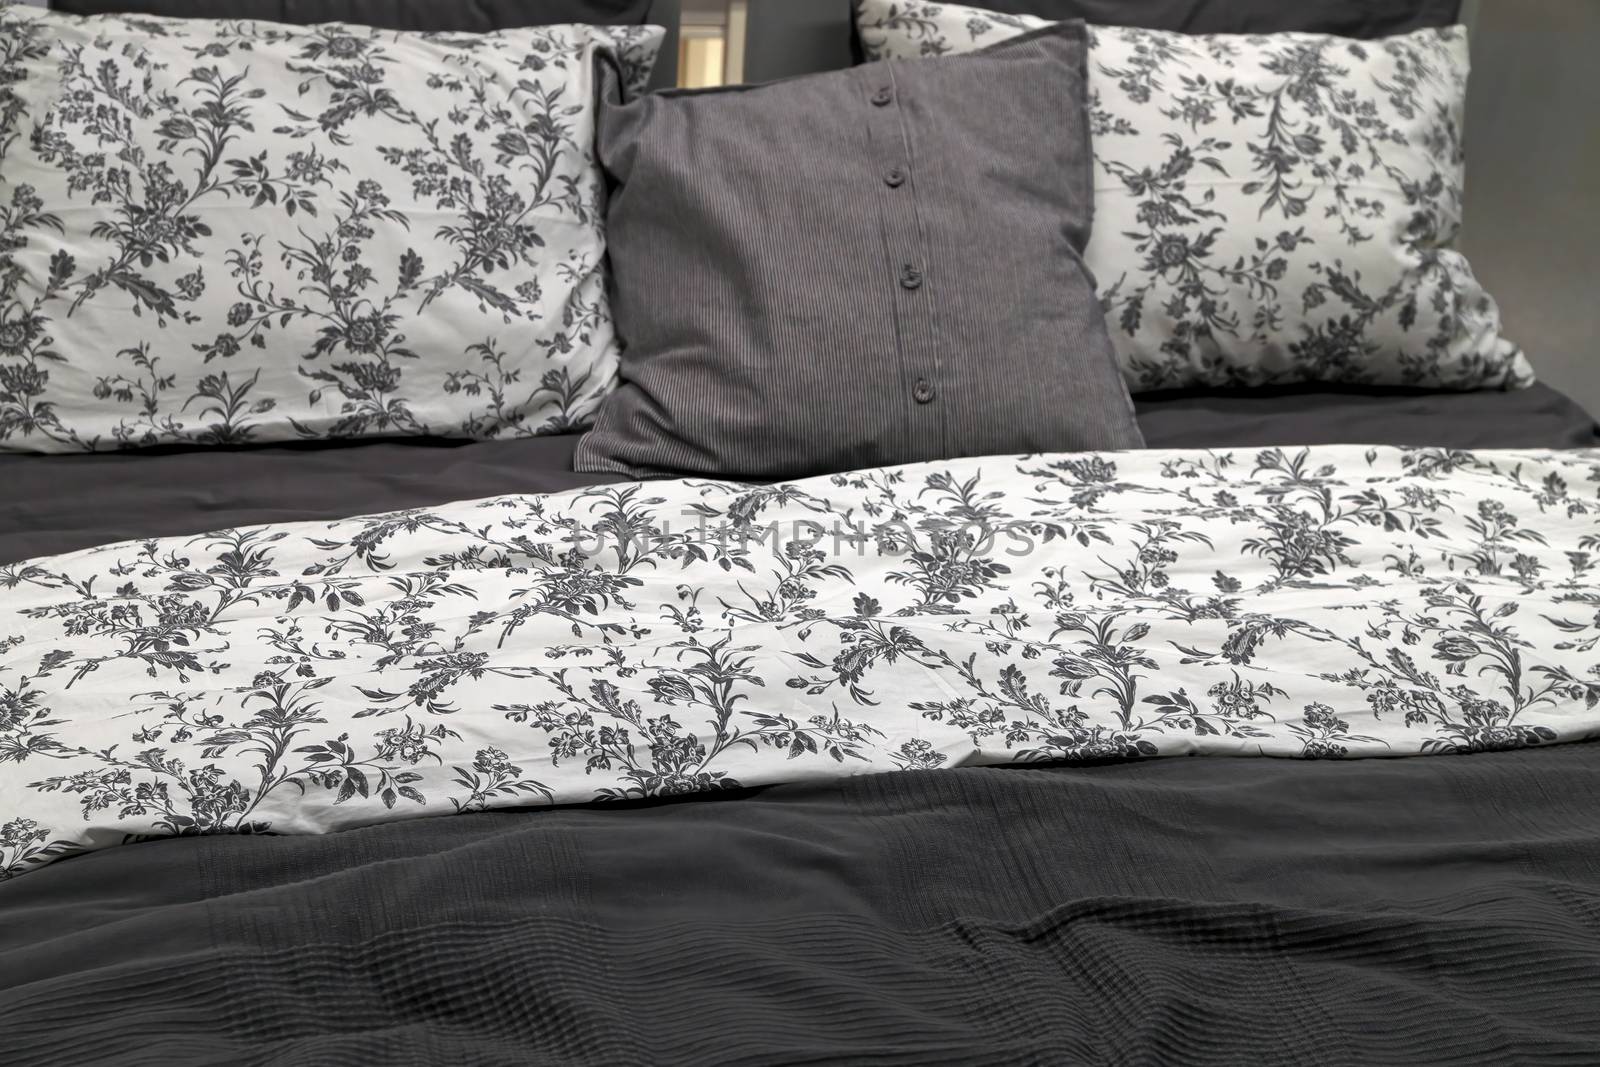 Bed and pillow set with bed runner by bonilook